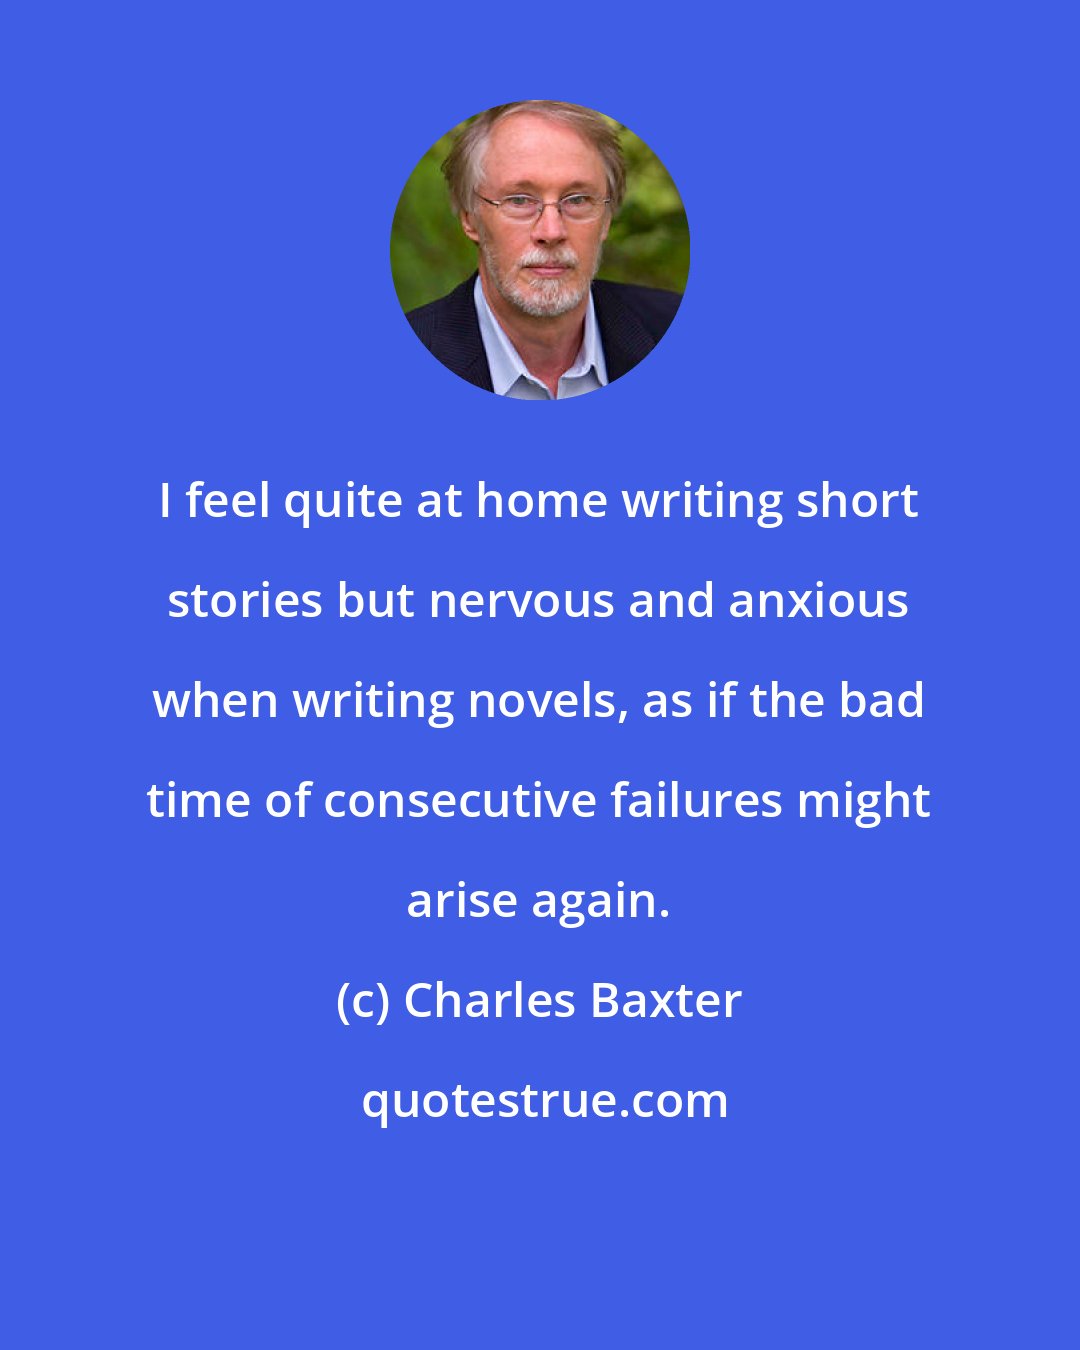 Charles Baxter: I feel quite at home writing short stories but nervous and anxious when writing novels, as if the bad time of consecutive failures might arise again.